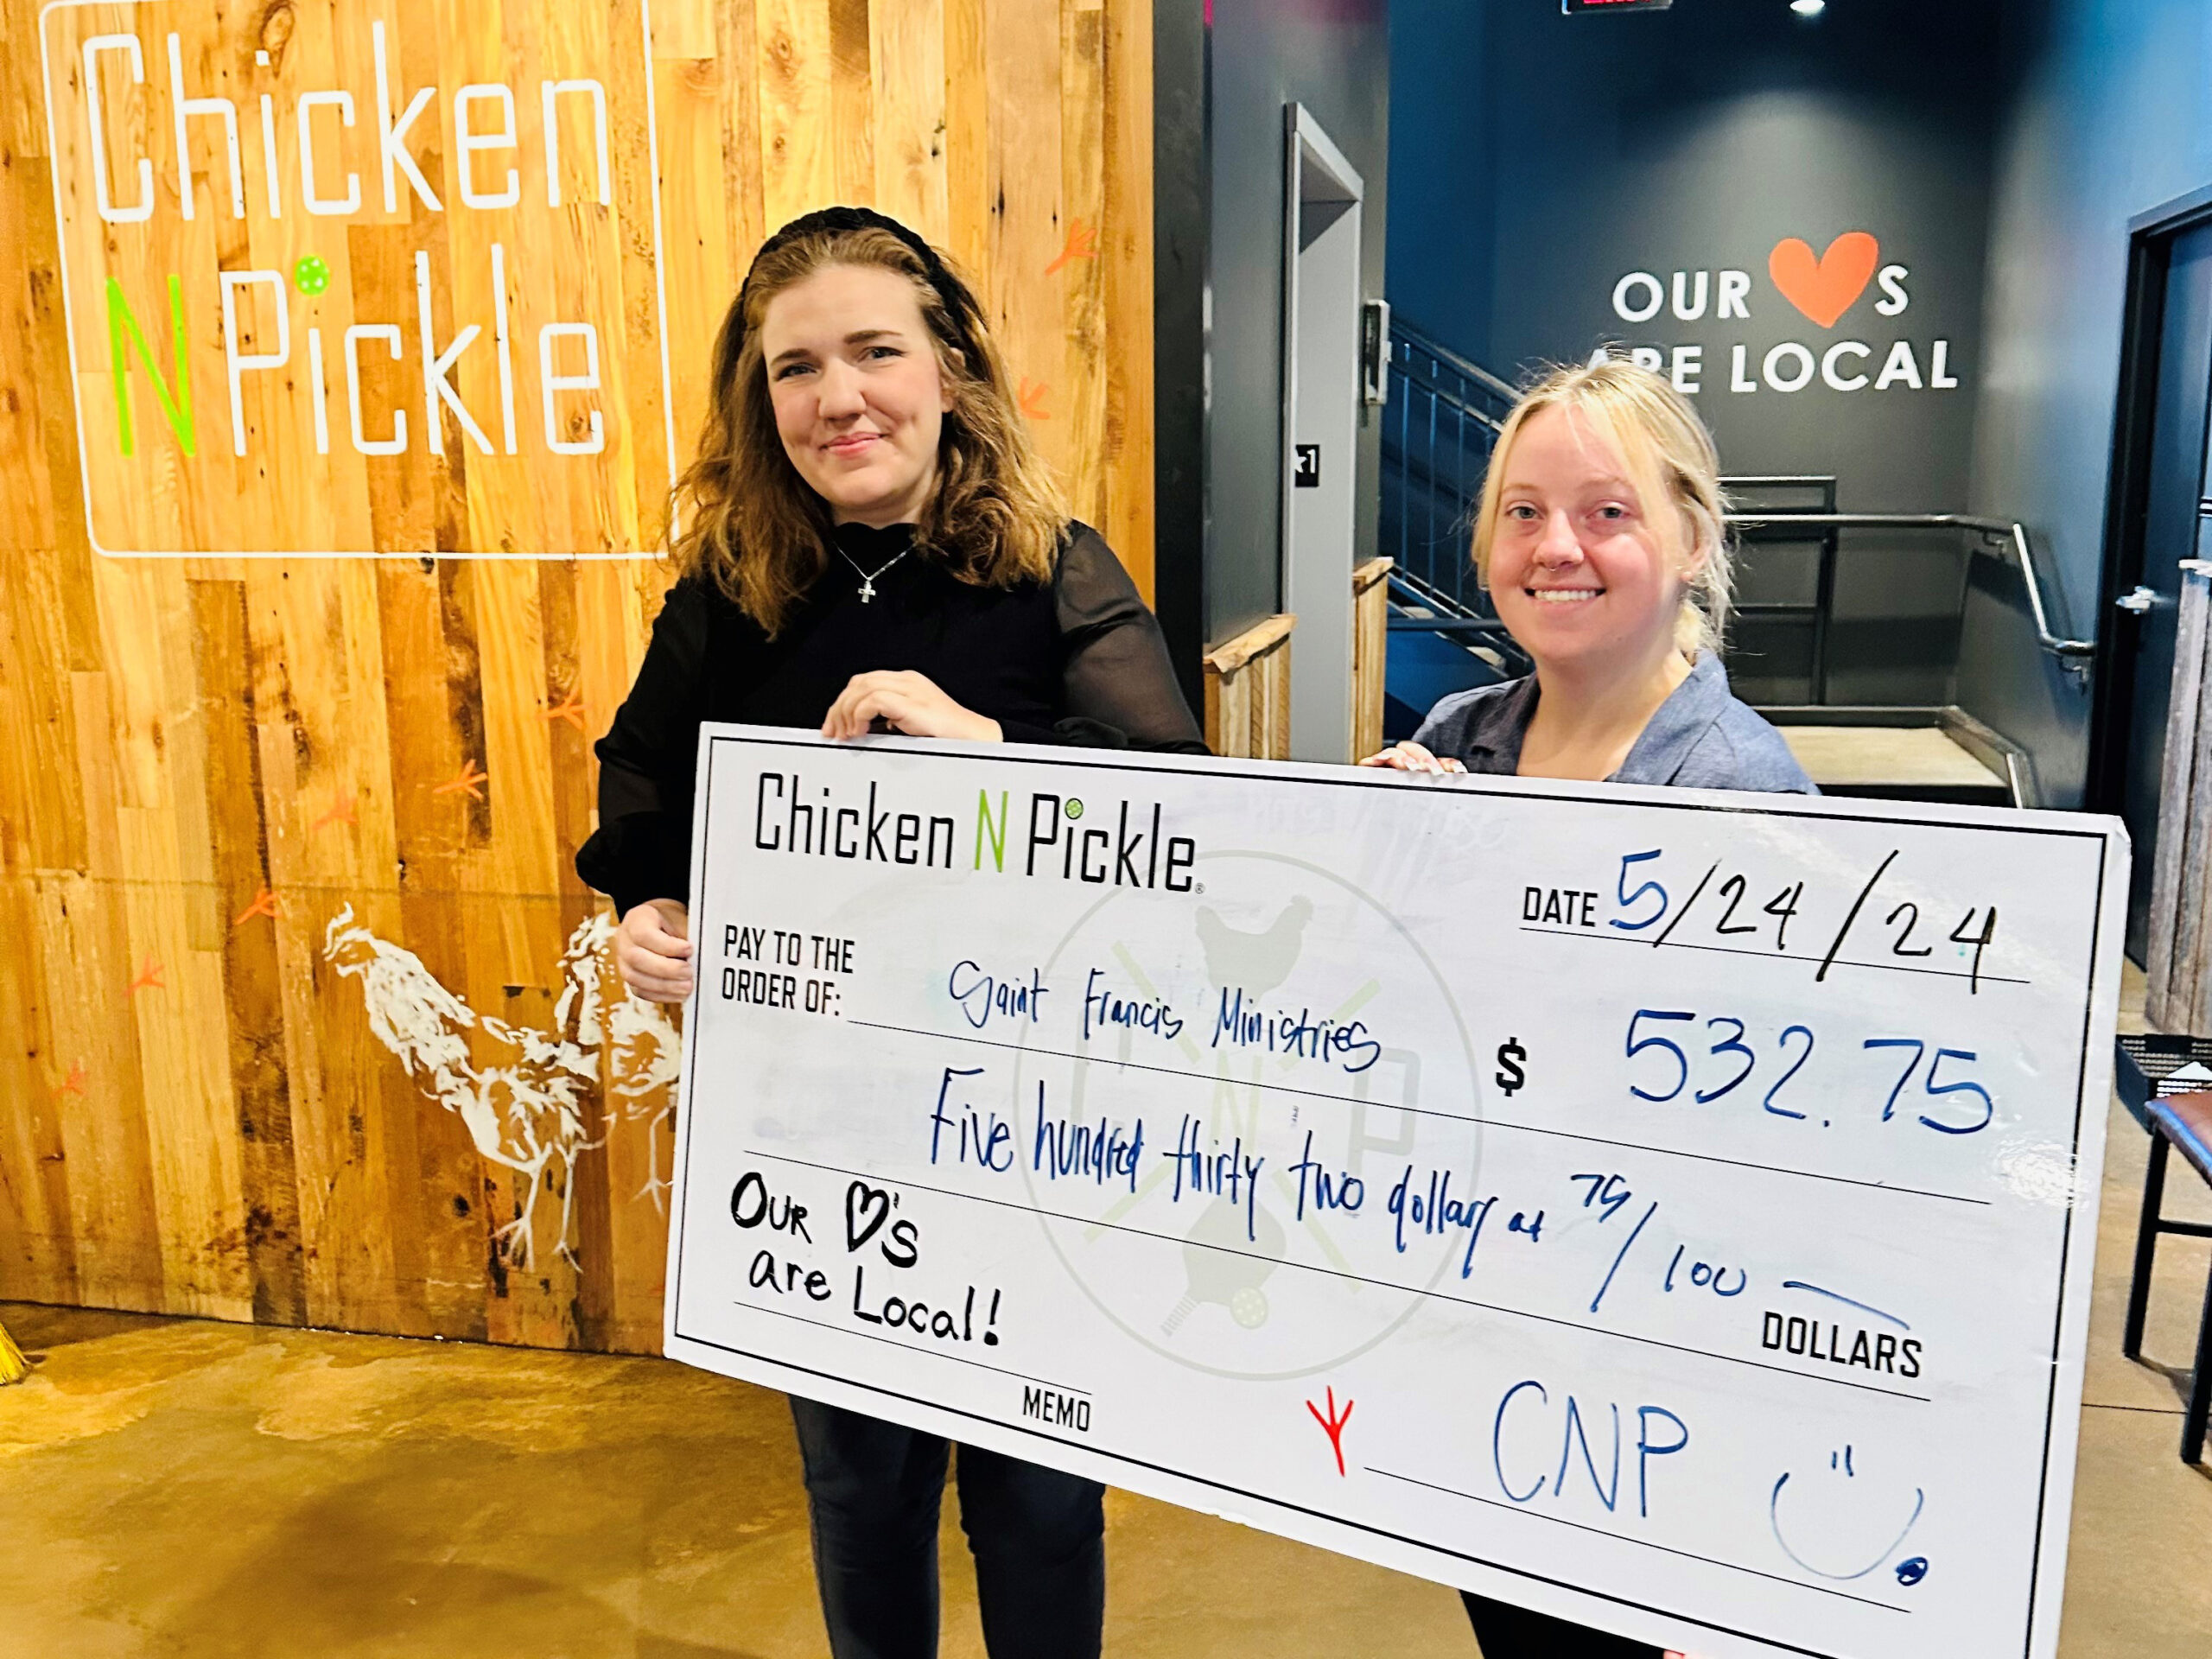 Two individuals smile while holding a large check worth $532.75 made out to Saint Francis Ministries from Chicken N Pickle. The presentation date is 5/24/24. They are standing in front of a wooden wall with the Chicken N Pickle logo and a heart symbol.